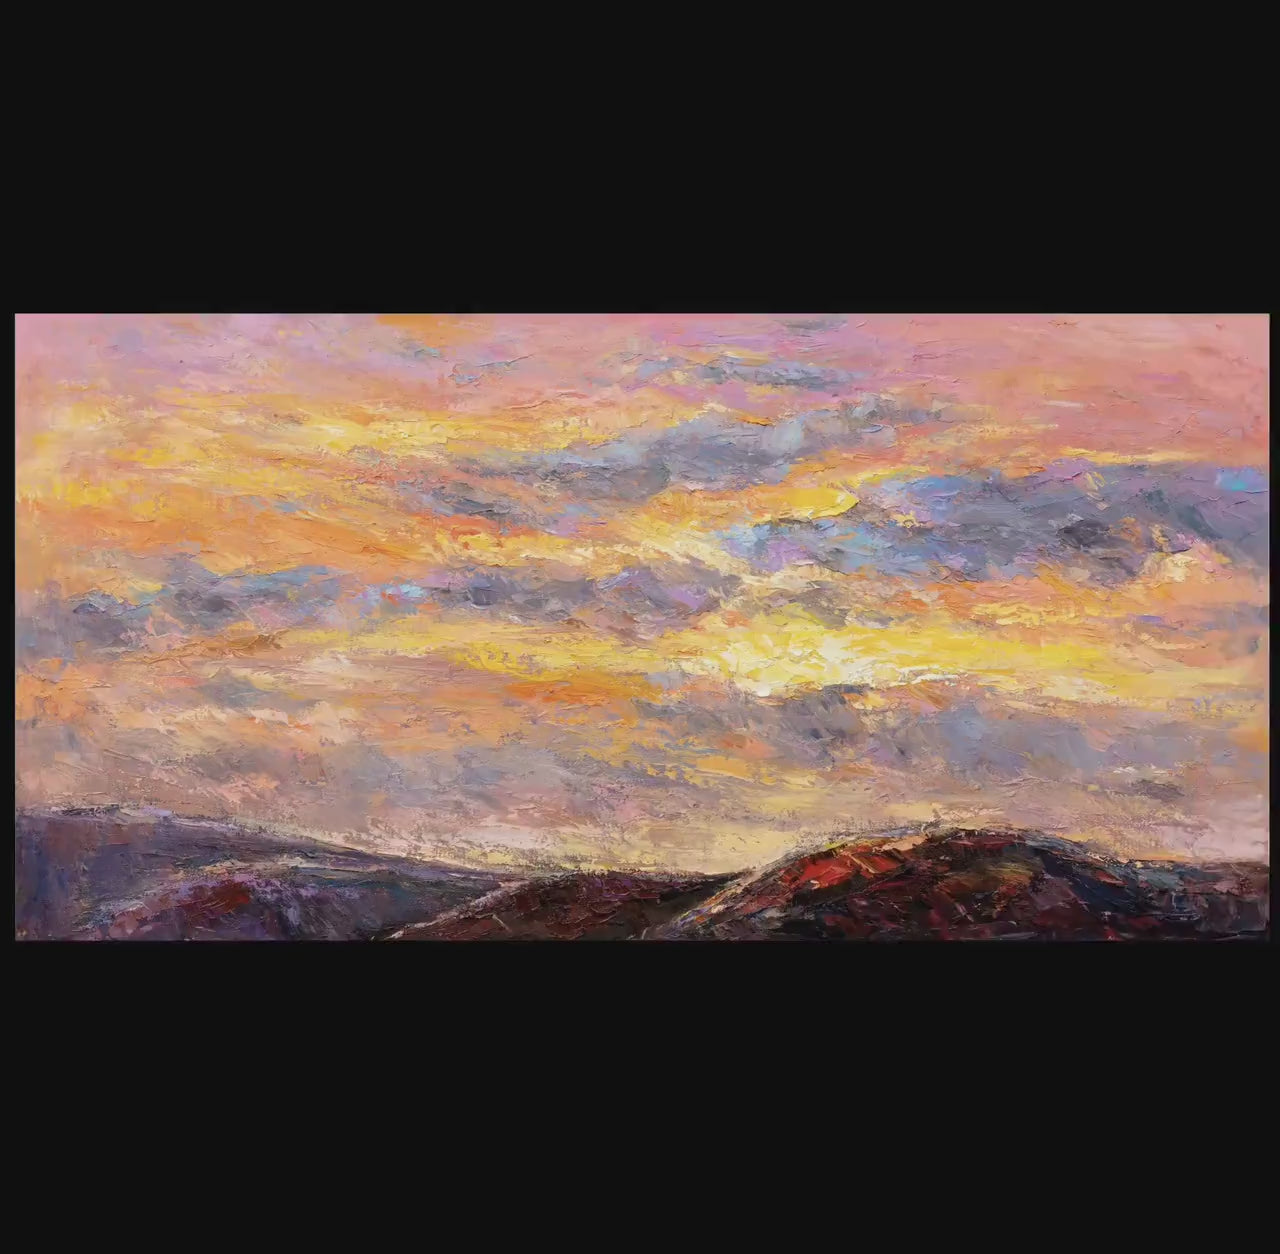 Abstract Painting Sunrise in the mountains, Oil Painting, Original Art, Modern Art, Canvas Painting, Abstract Painting, Modern Wall Art